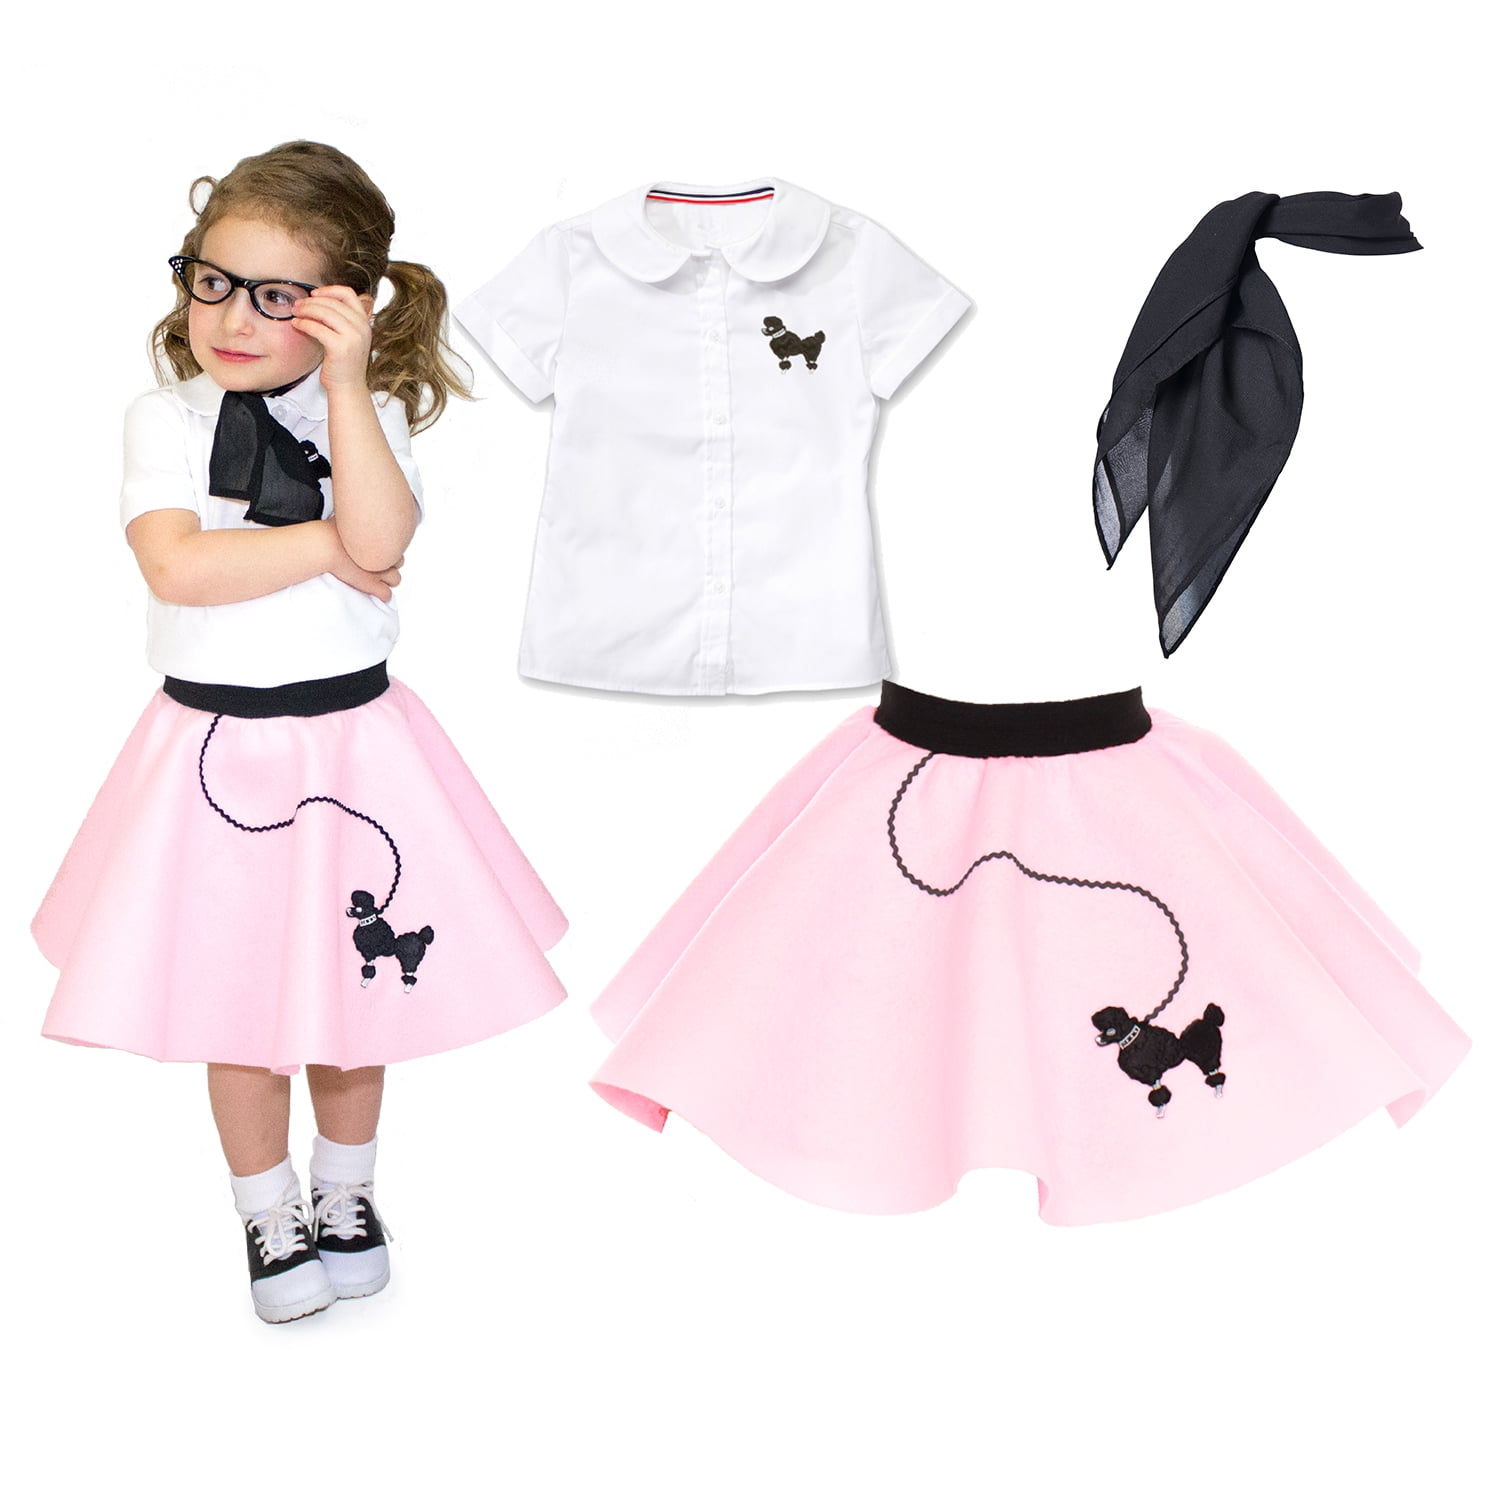 Toddler 3 pc - 50's Poodle Skirt Outfit Costume - 2T / Light Pink ...